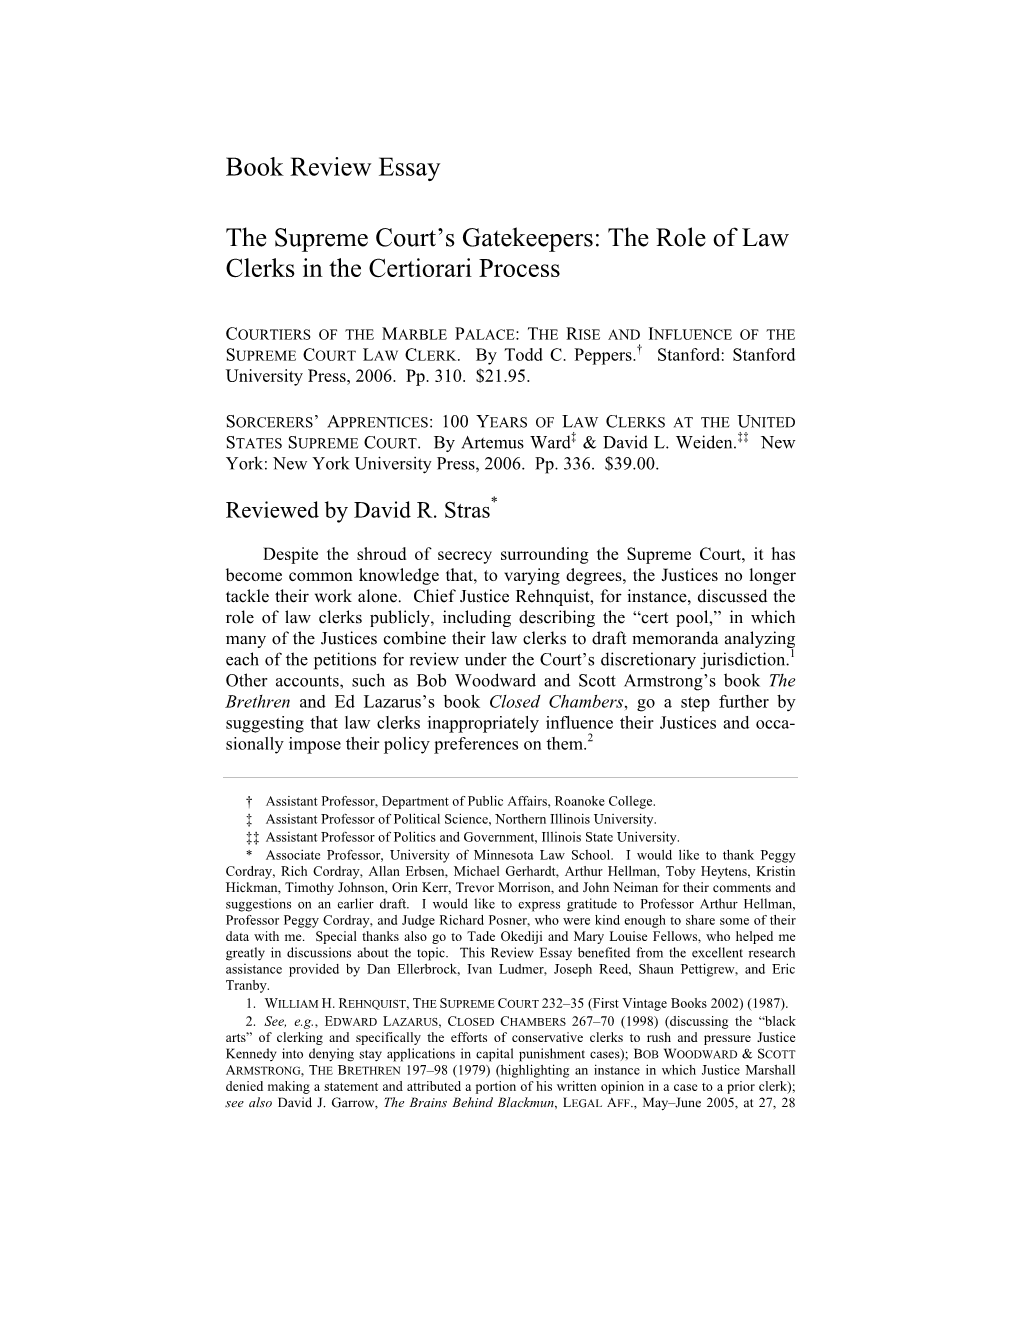 Book Review Essay the Supreme Court's Gatekeepers: the Role of Law Clerks in the Certiorari Process